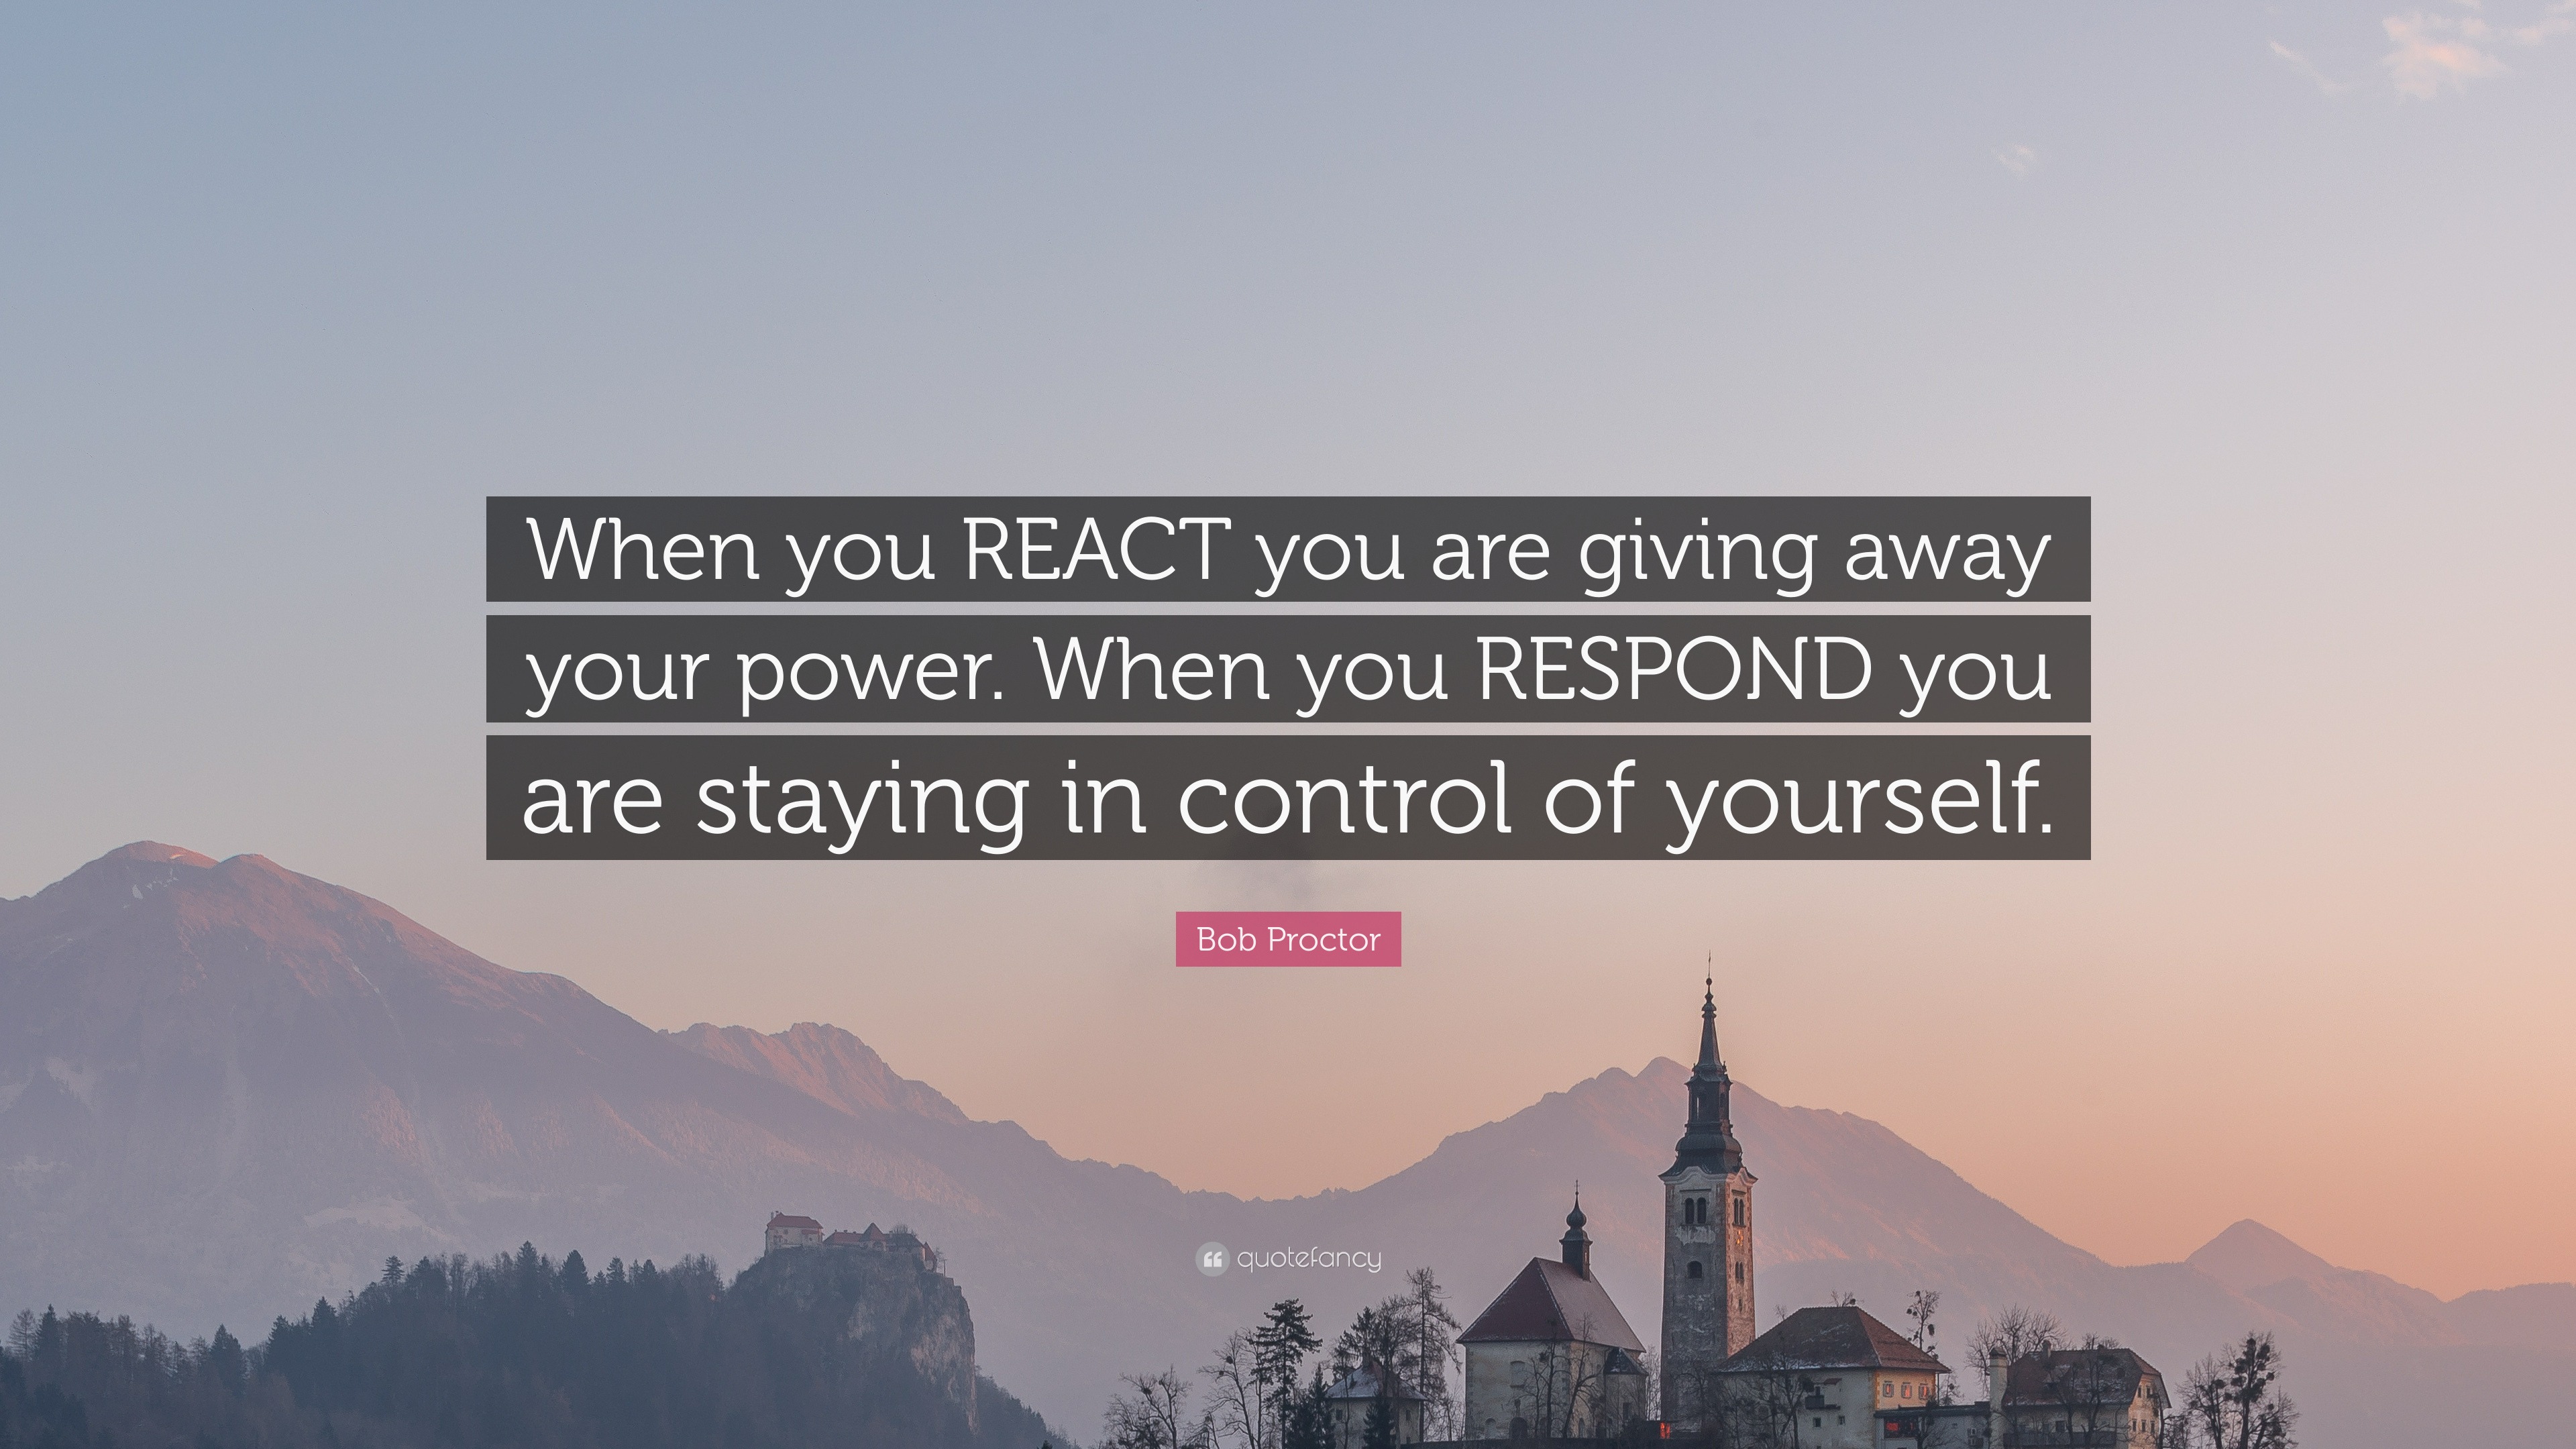 Bob Proctor Quote: “When you REACT you are giving away your power. When you  RESPOND you